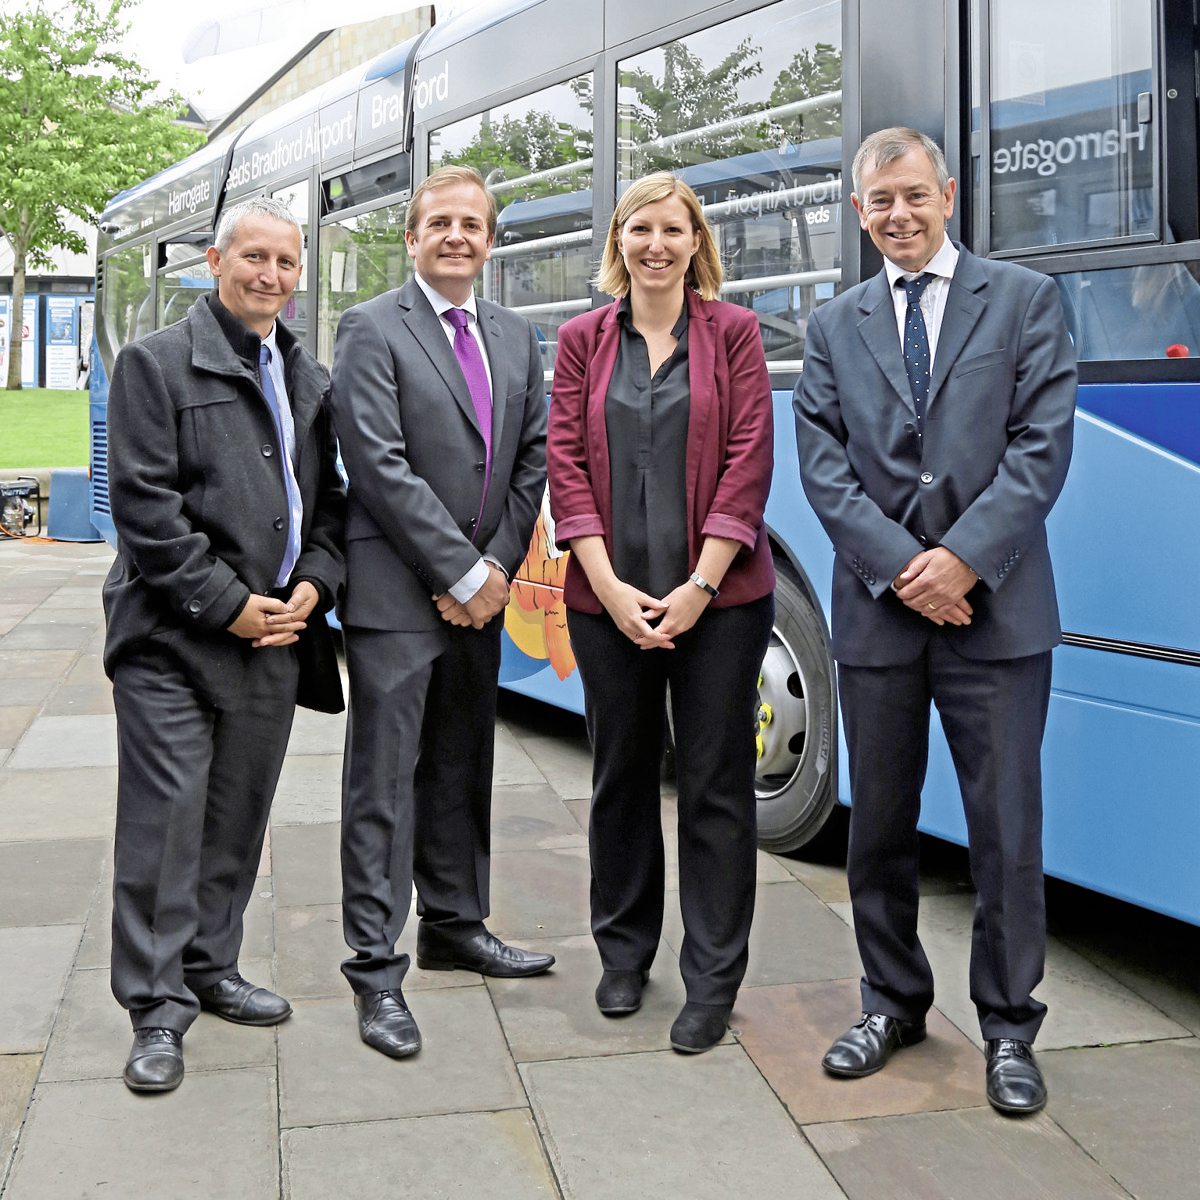 Leeds Bradford Airport PR and Public Relations Manager, Kayley Worsley 2nd right with the Yorkshire Tiger management team LtoR-Tony Lowe, Simon Finnie and Bob Mason